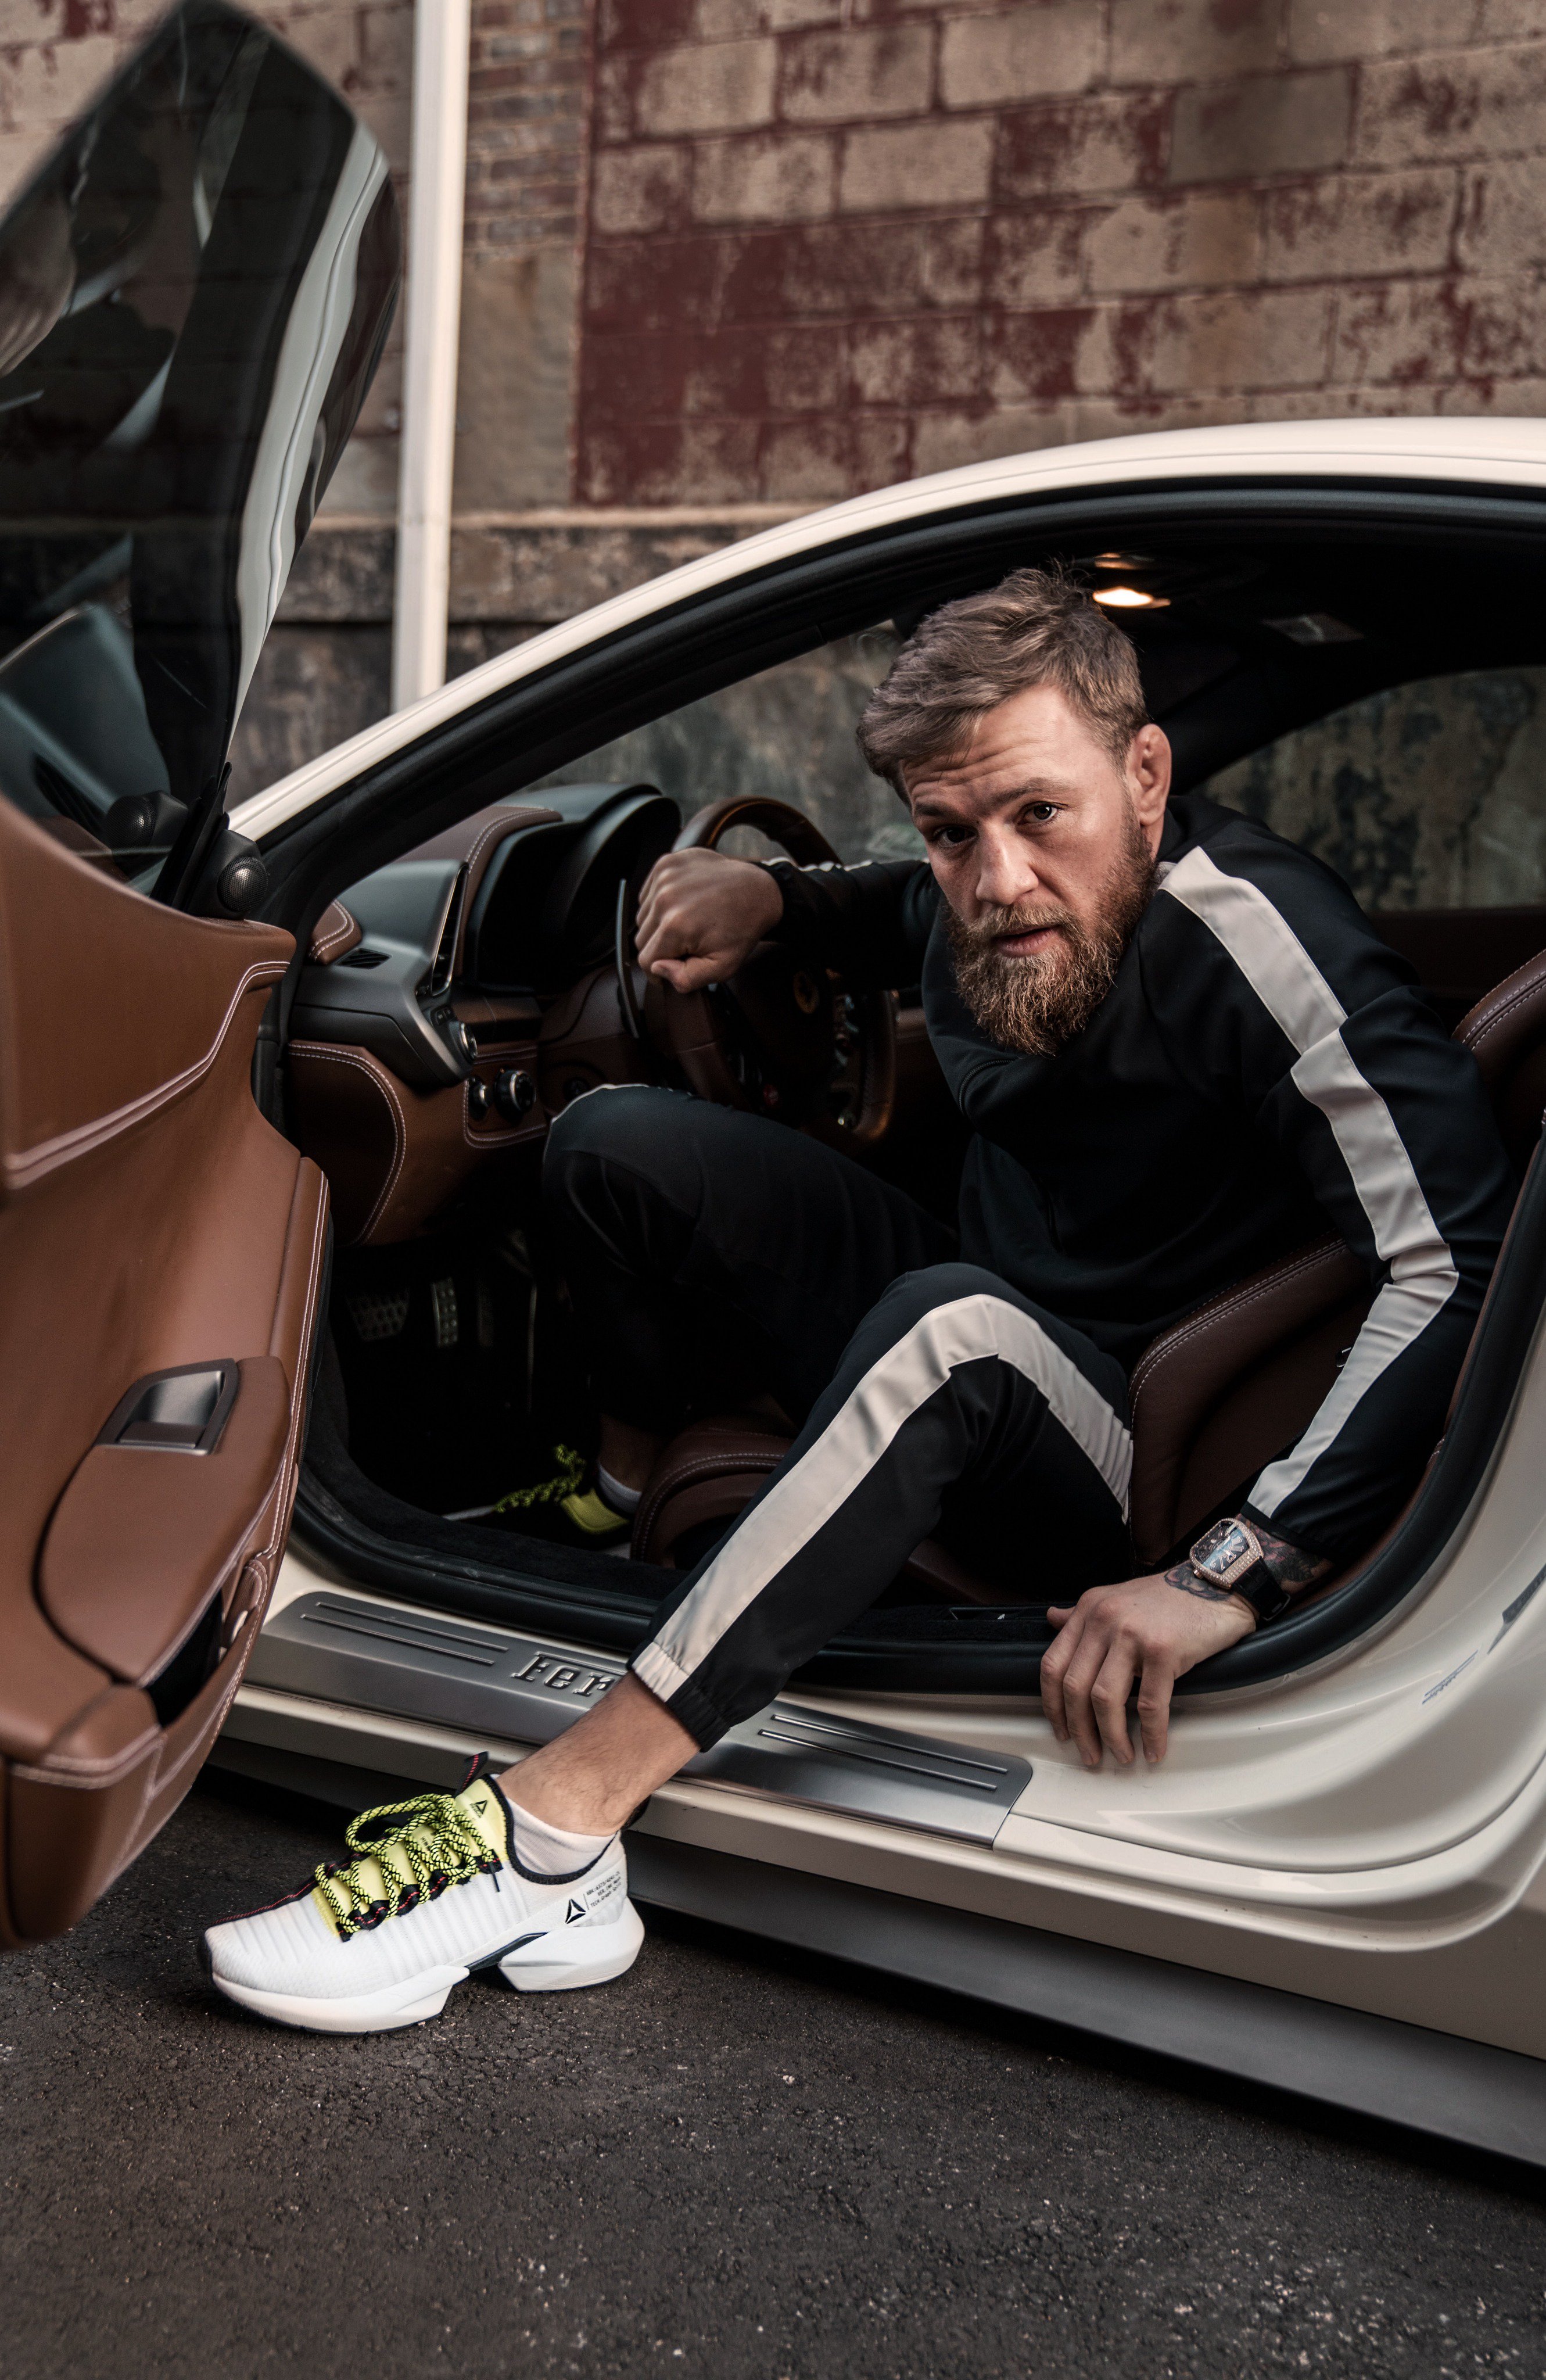 tuin Vlot Vervormen Conor McGregor on Twitter: "Fresh new Sole Fury's from my team at Reebok.  My shoes will always be better than yours! #SplitFrom | @Reebok 's new  #SoleFury https://t.co/PLrhmHa3rt" / Twitter